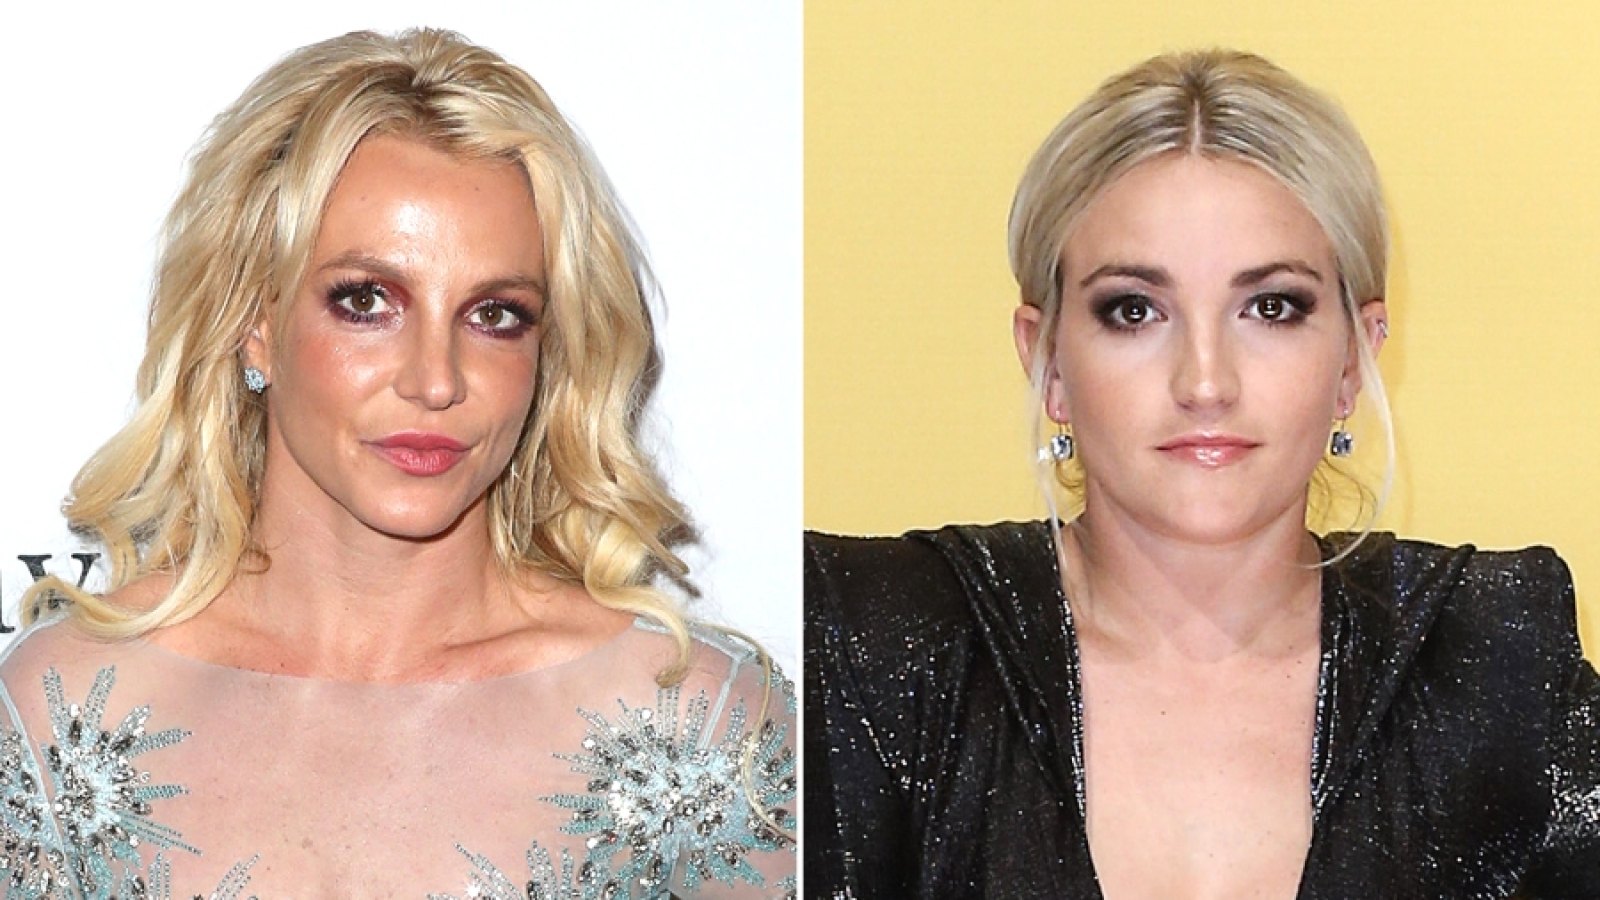 ritney Spears spoke out amid her feud with Jamie Lynn Spears